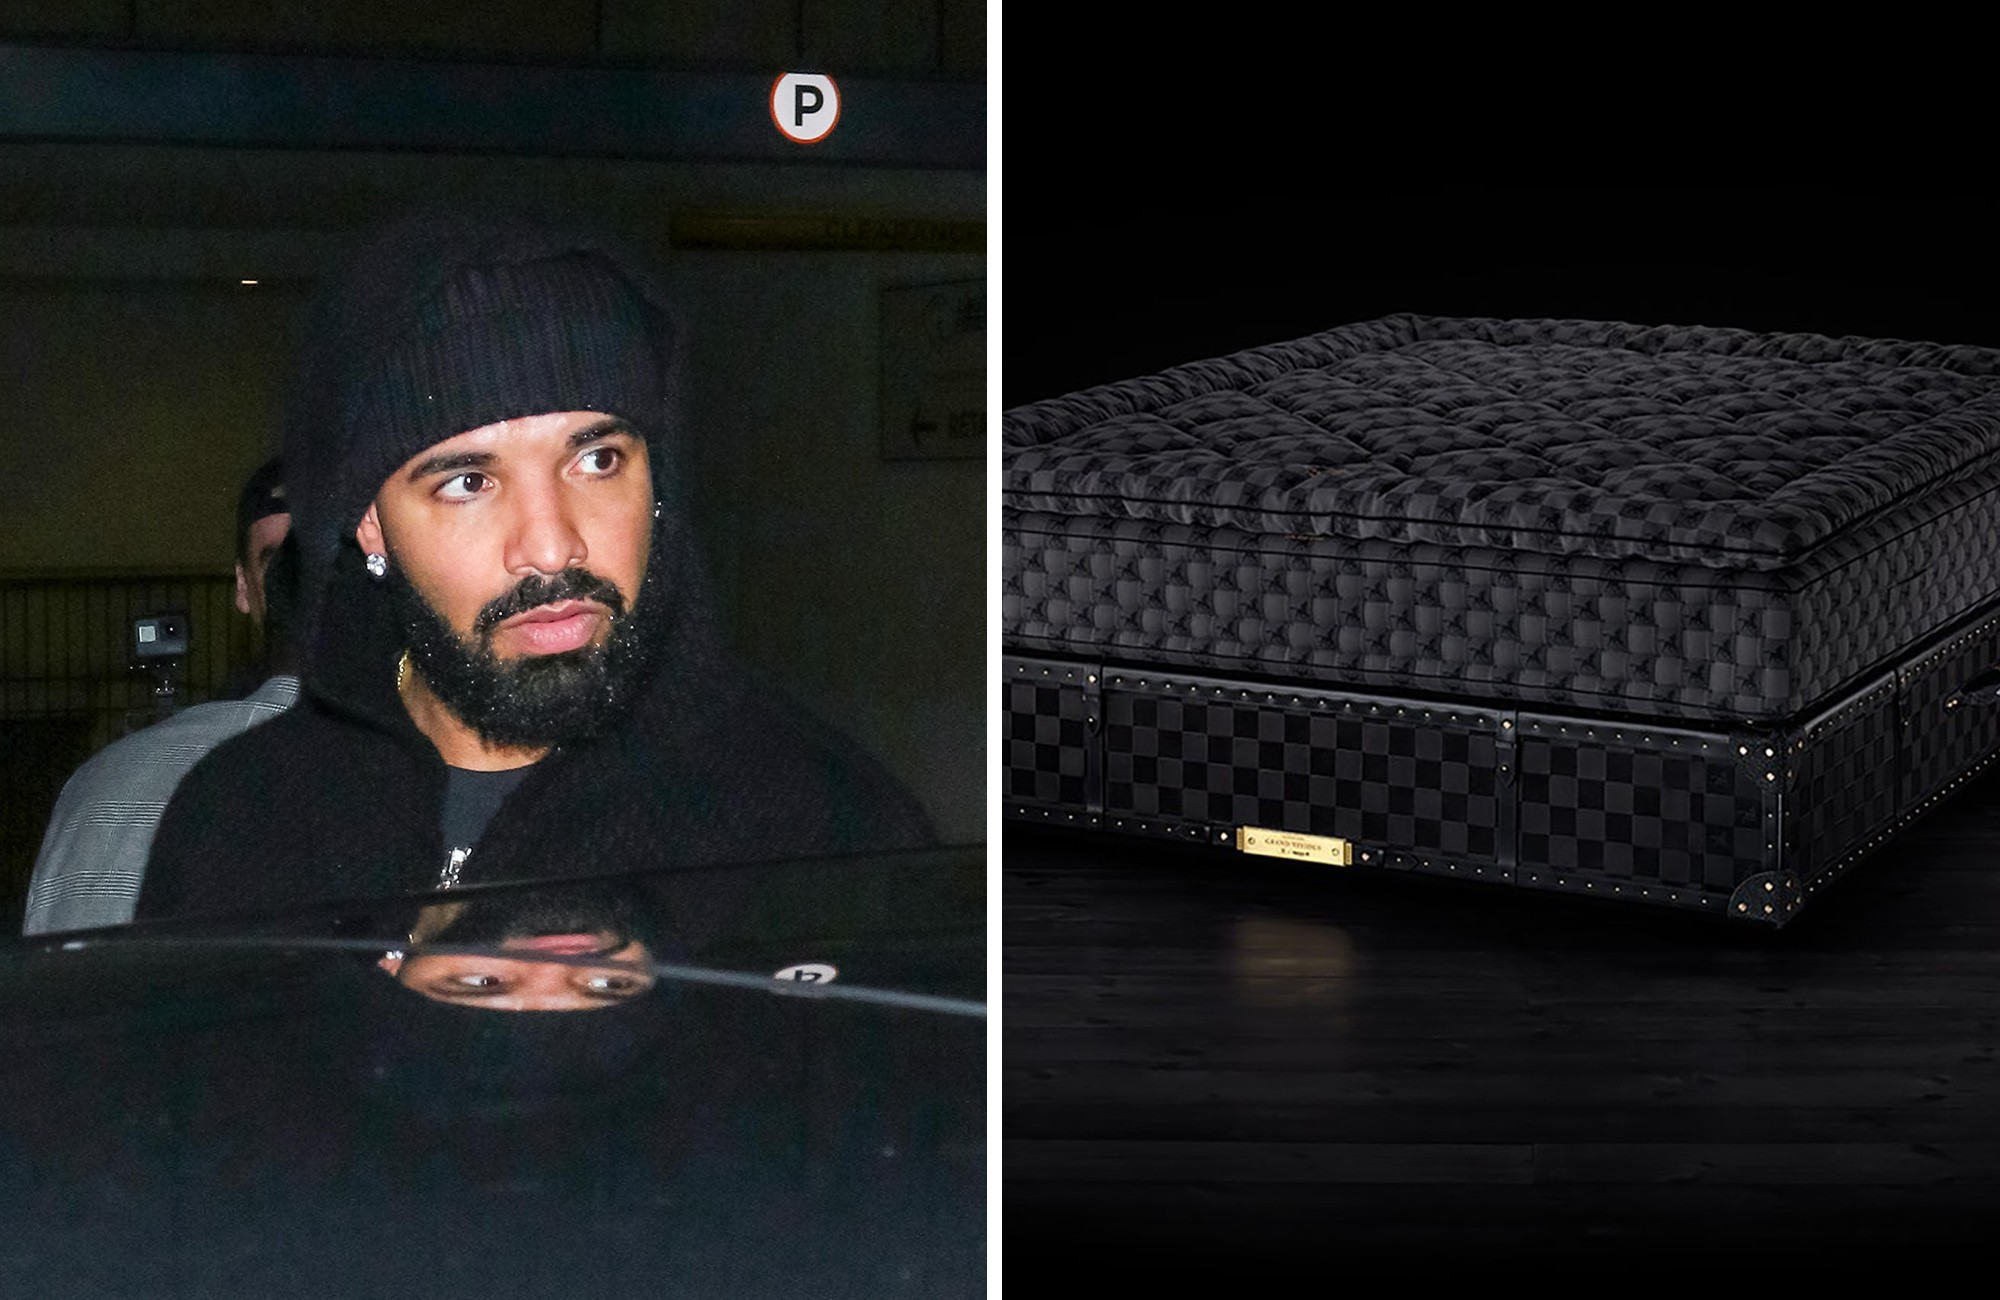 Drake's Mattress Costs $395,000. Here's Why.